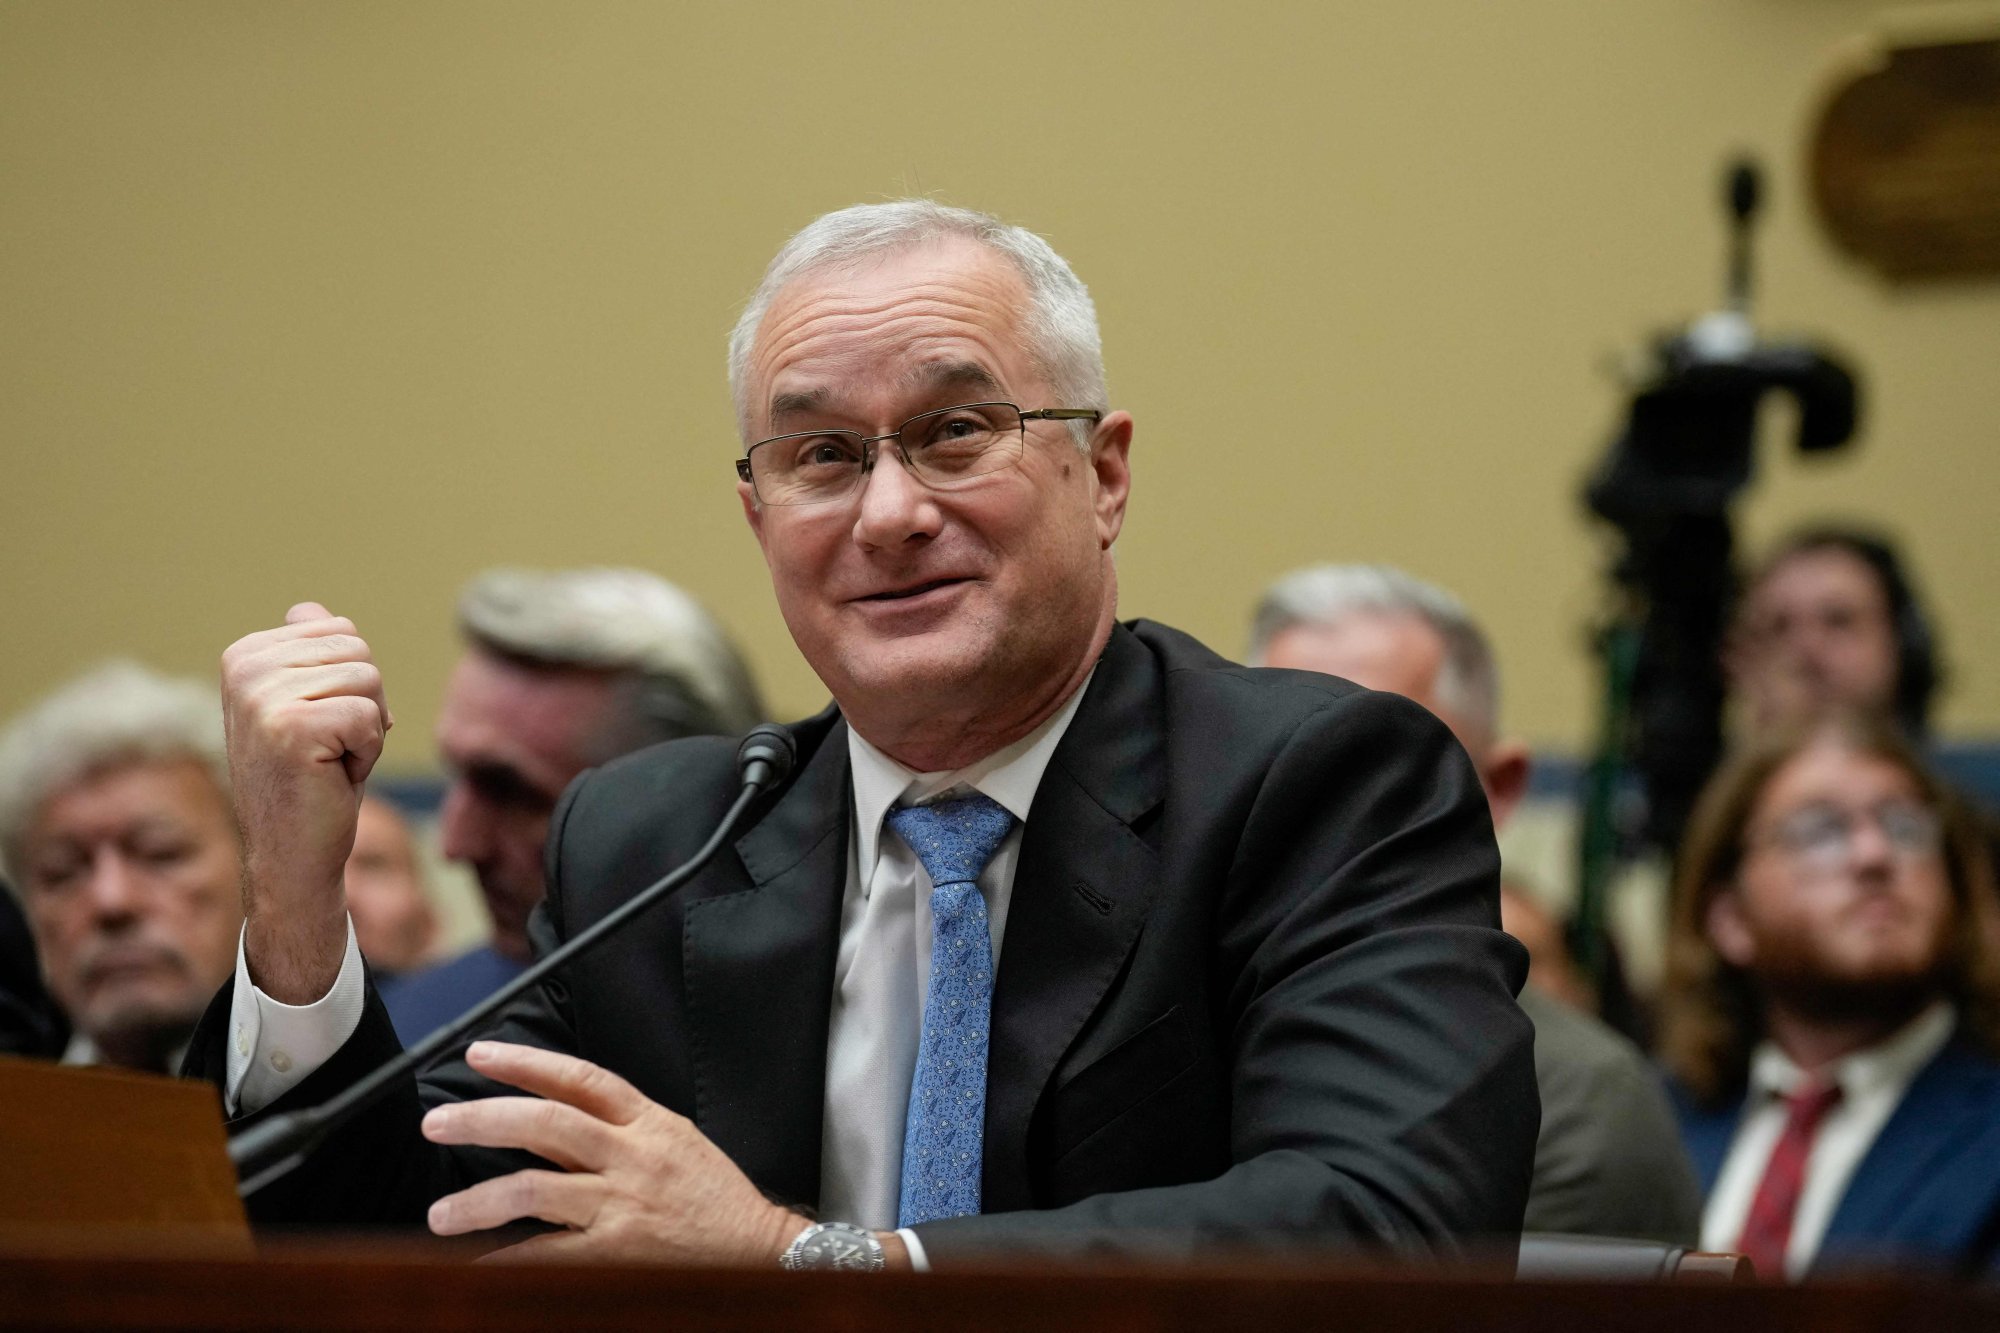 Retired Navy commander David Fravor during the hearing. Photo: Getty Images/AFP